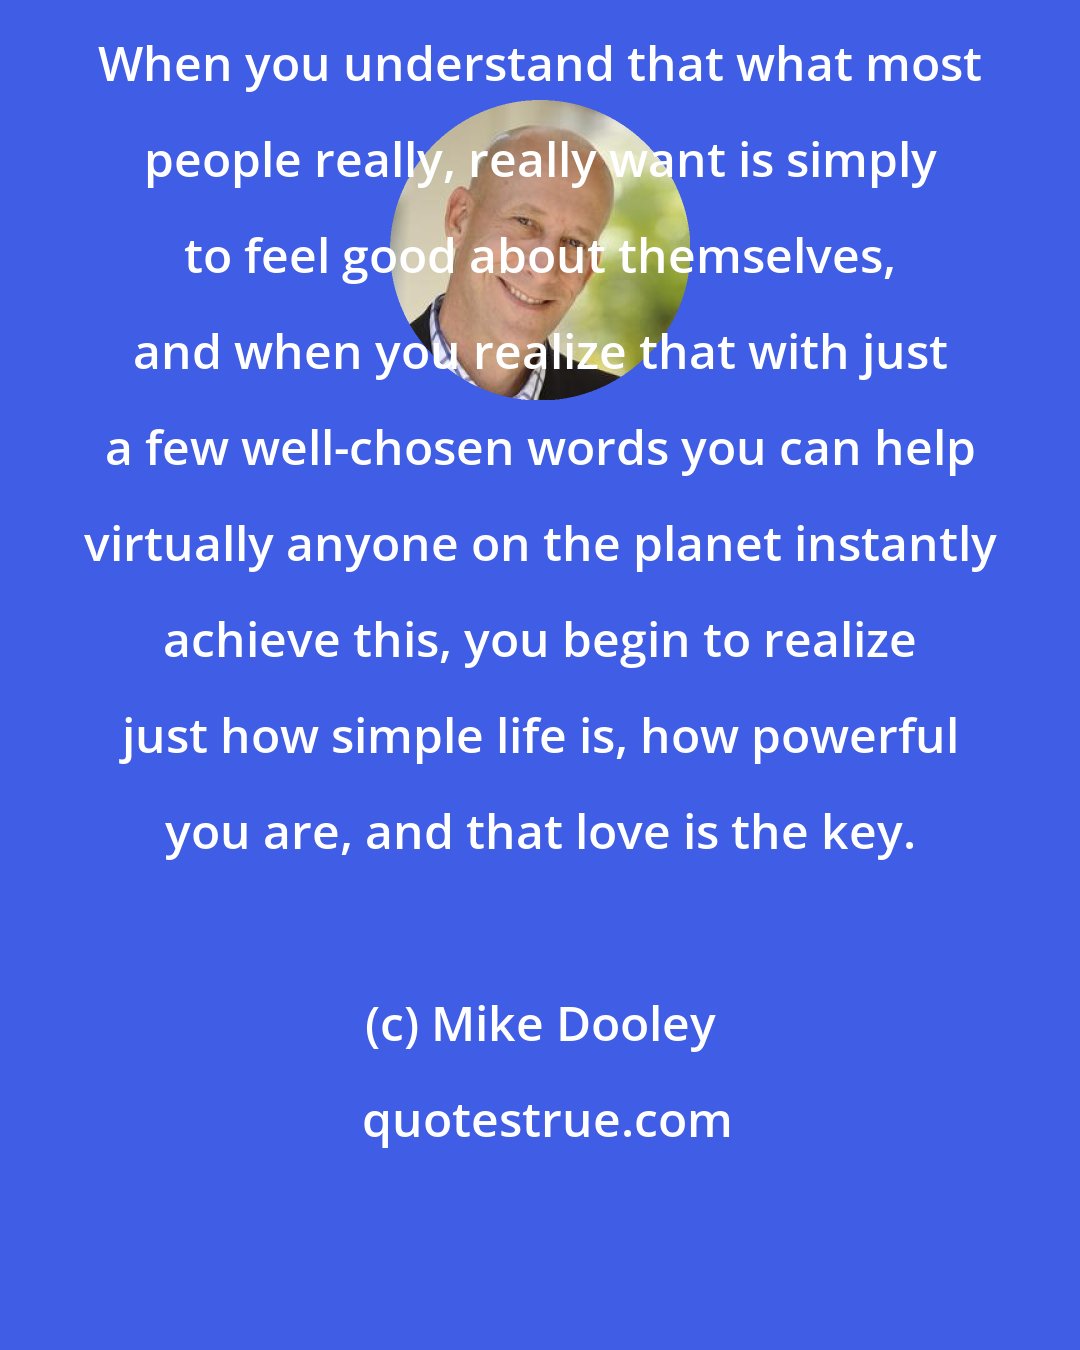 Mike Dooley: When you understand that what most people really, really want is simply to feel good about themselves, and when you realize that with just a few well-chosen words you can help virtually anyone on the planet instantly achieve this, you begin to realize just how simple life is, how powerful you are, and that love is the key.